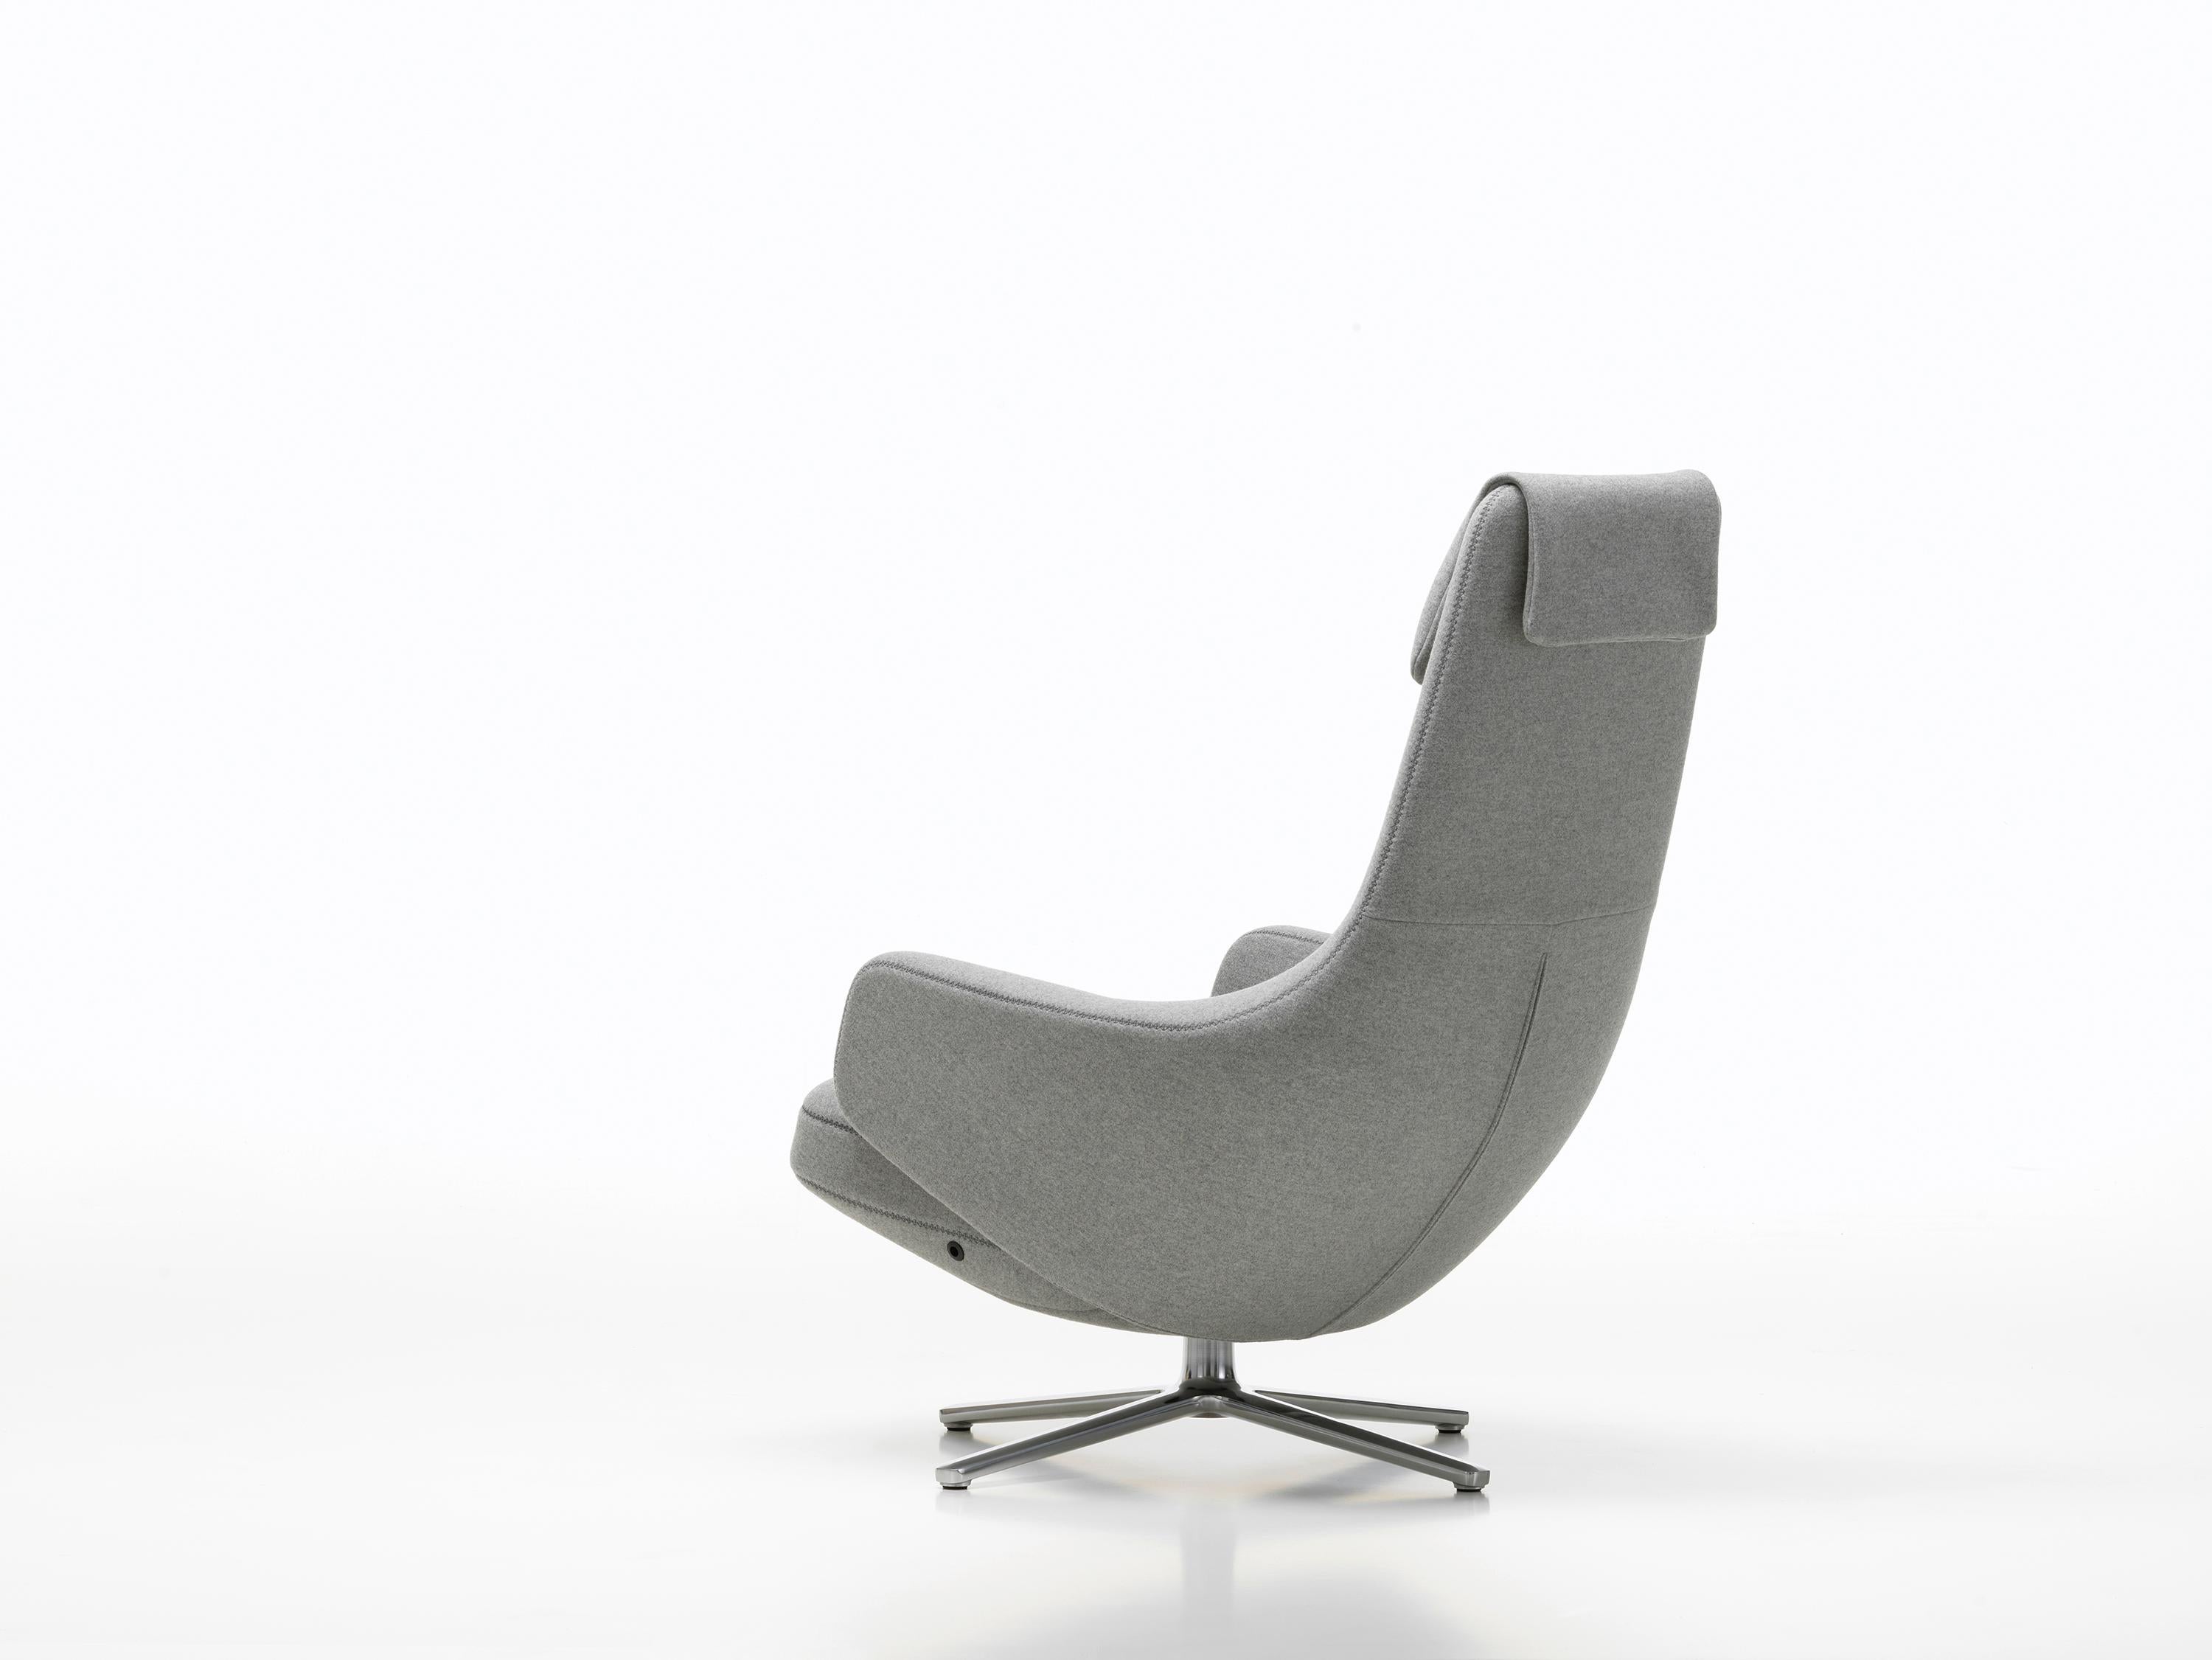 Vitra Repos Lounge Chair in Pebble Grey Cosy by Antonio Citterio For Sale 2